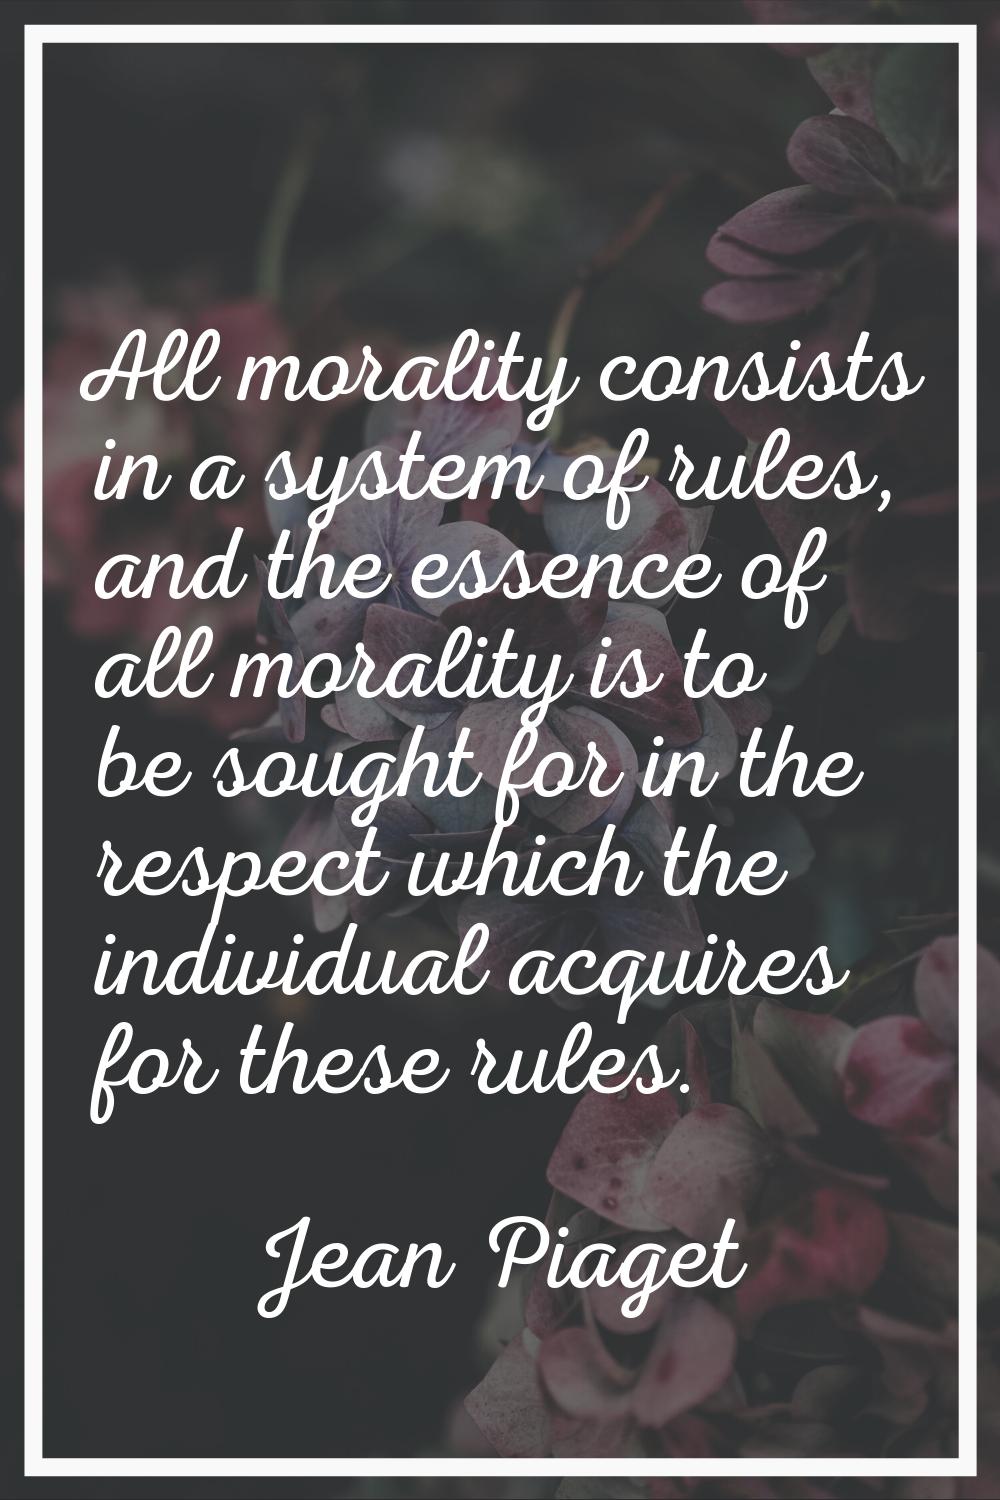 All morality consists in a system of rules, and the essence of all morality is to be sought for in 